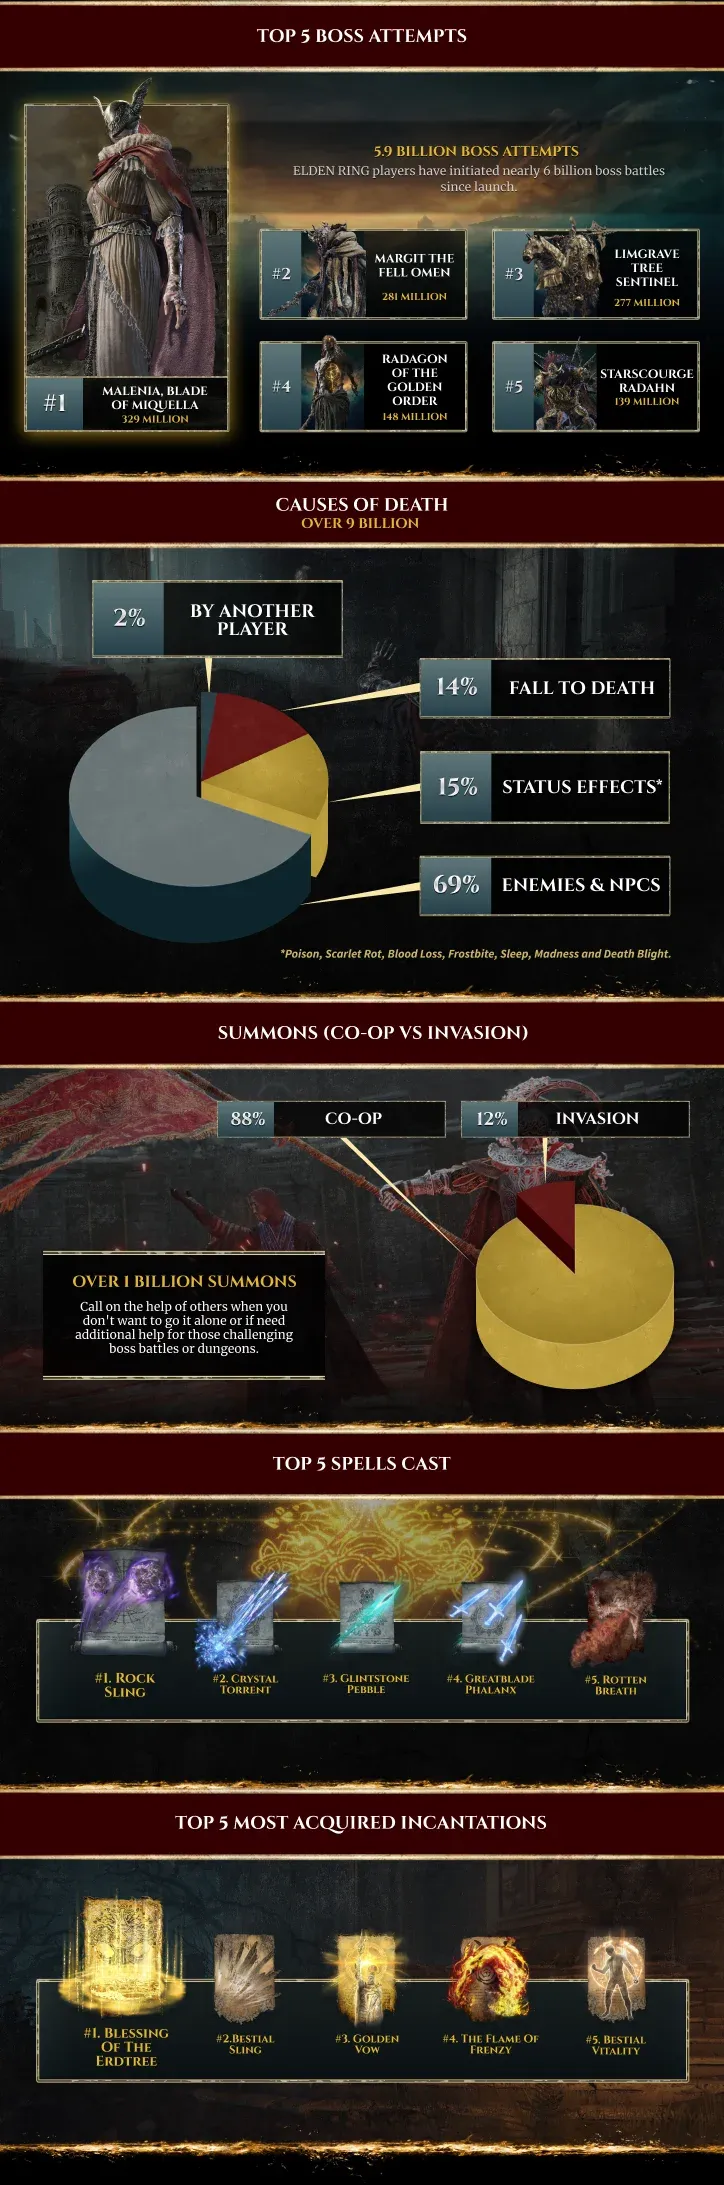 Image showing several pieces of information about player statistics from the first year of Elden Ring, including details like how many times players died (9 billion), the most challenging bosses, the most used spells, and more.